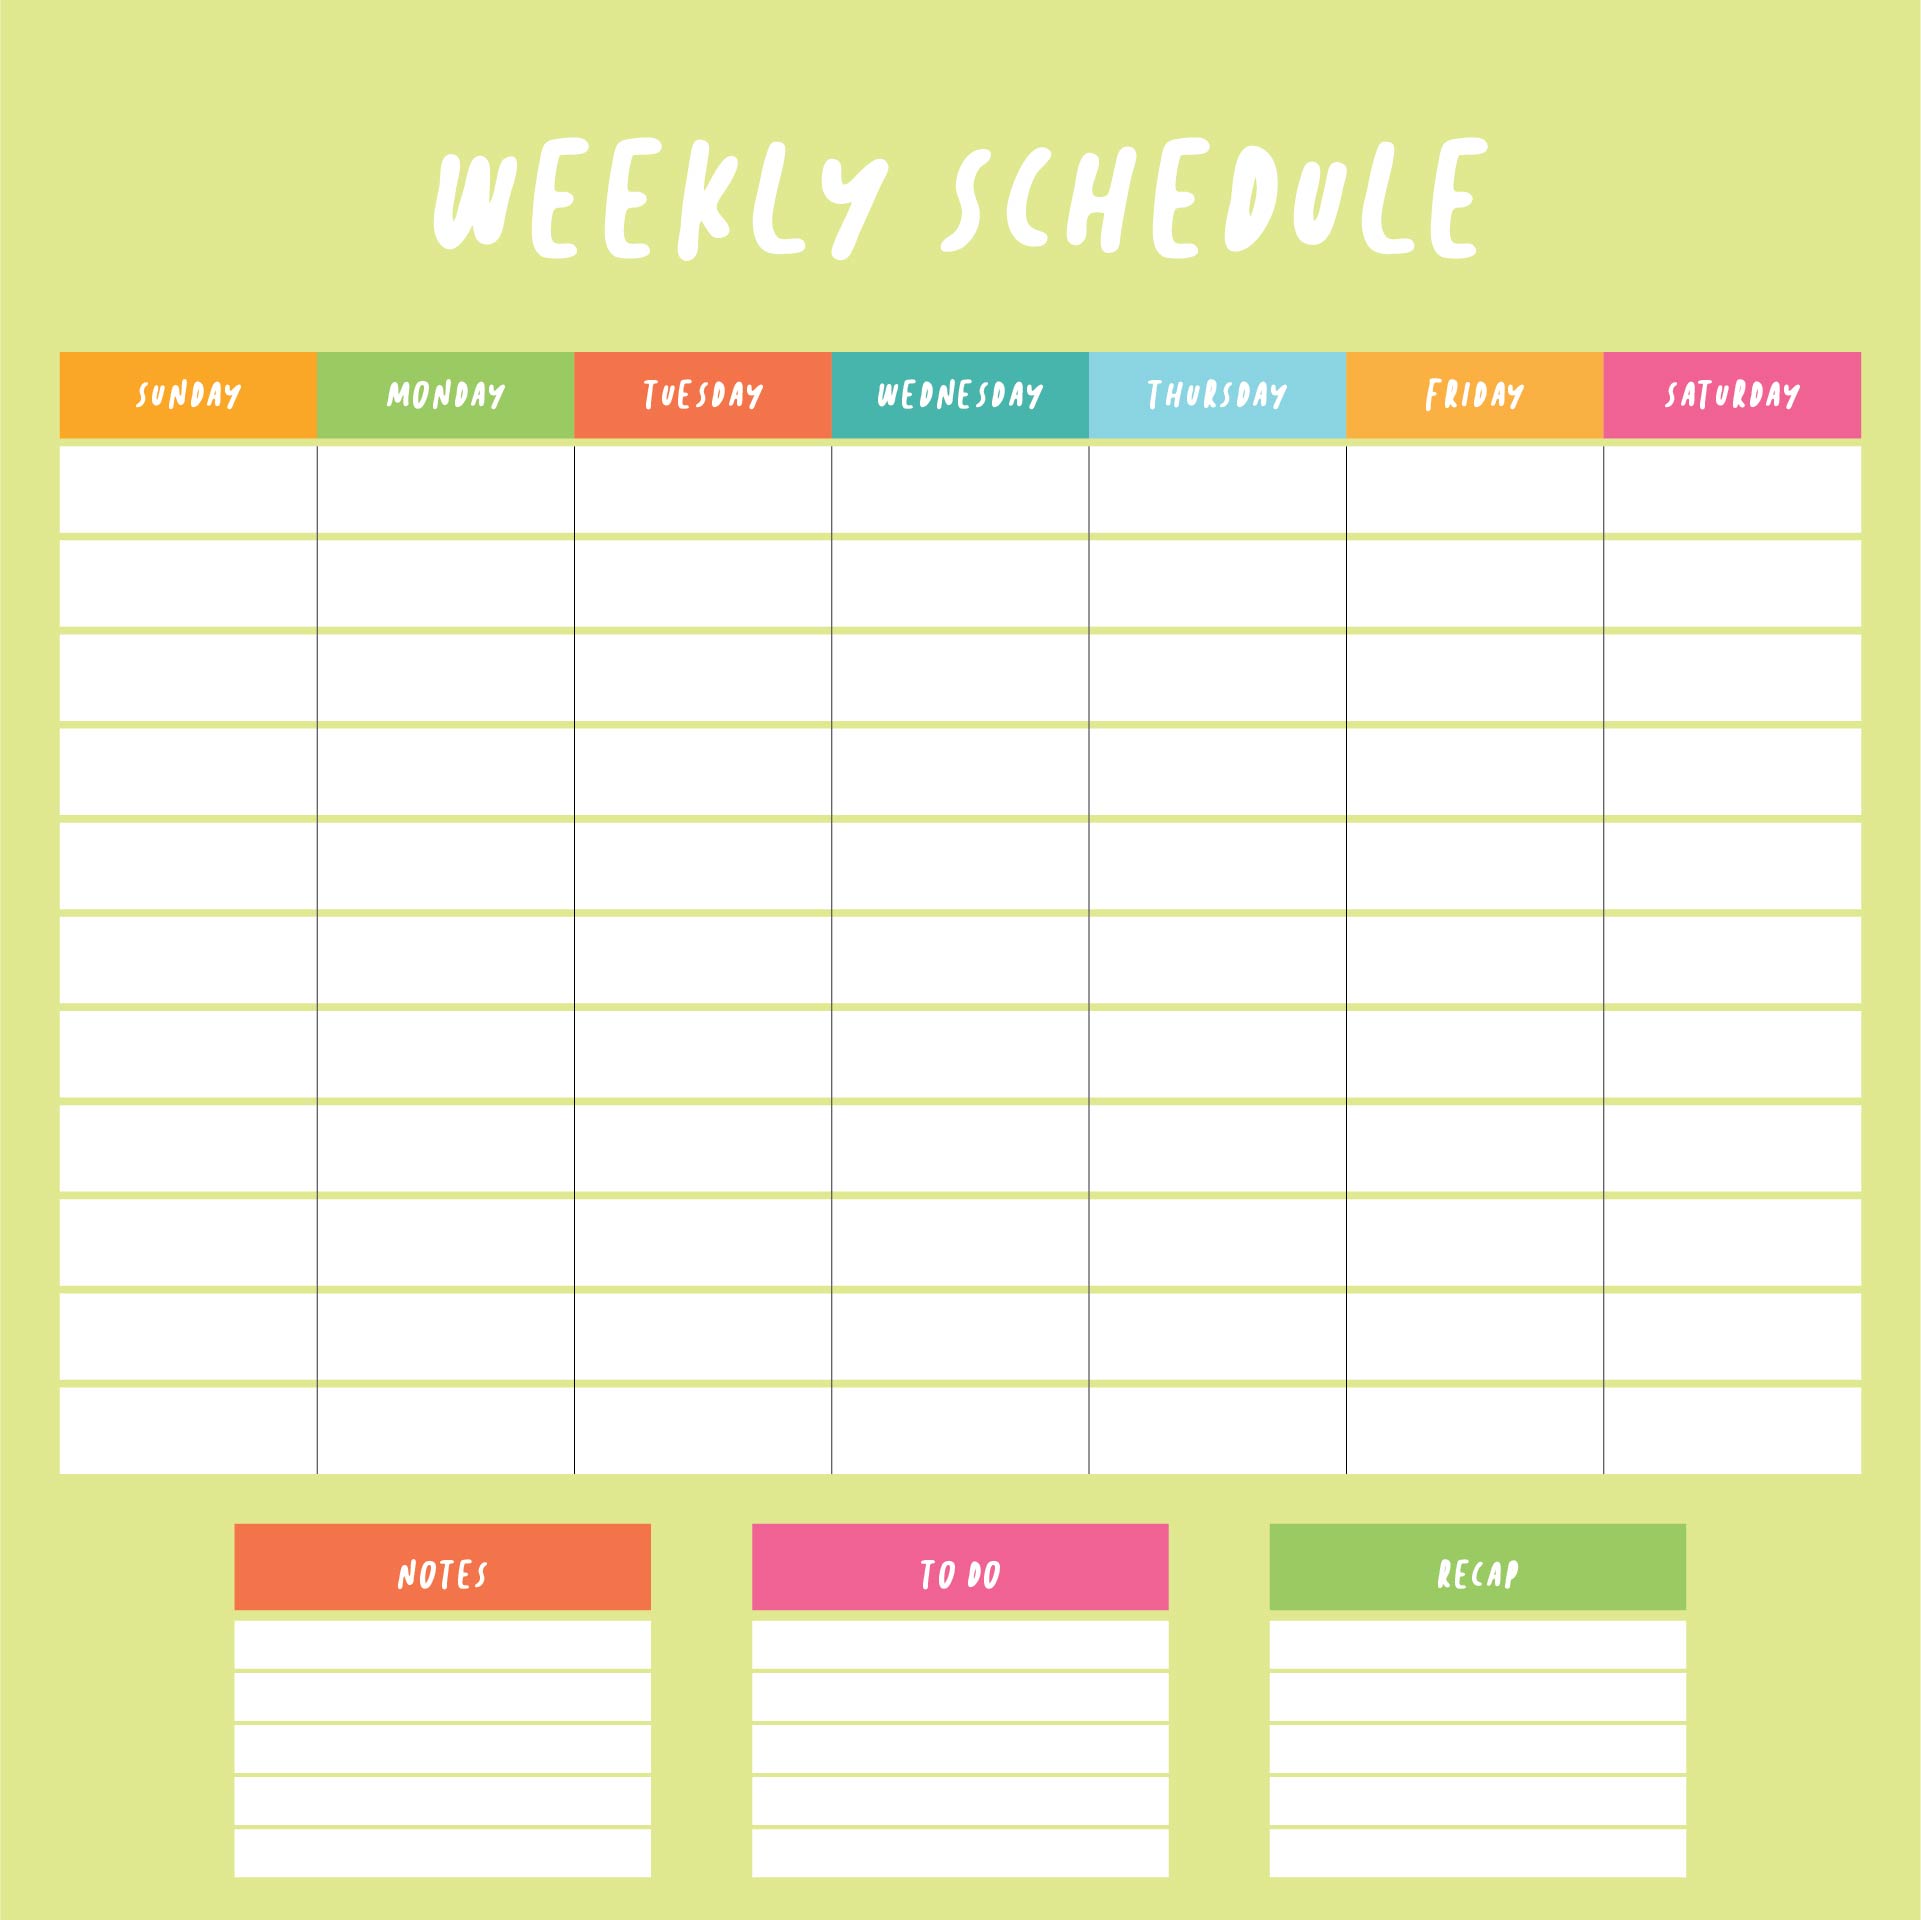 7-best-images-of-printable-weekly-calendar-with-15-minute-time-slots